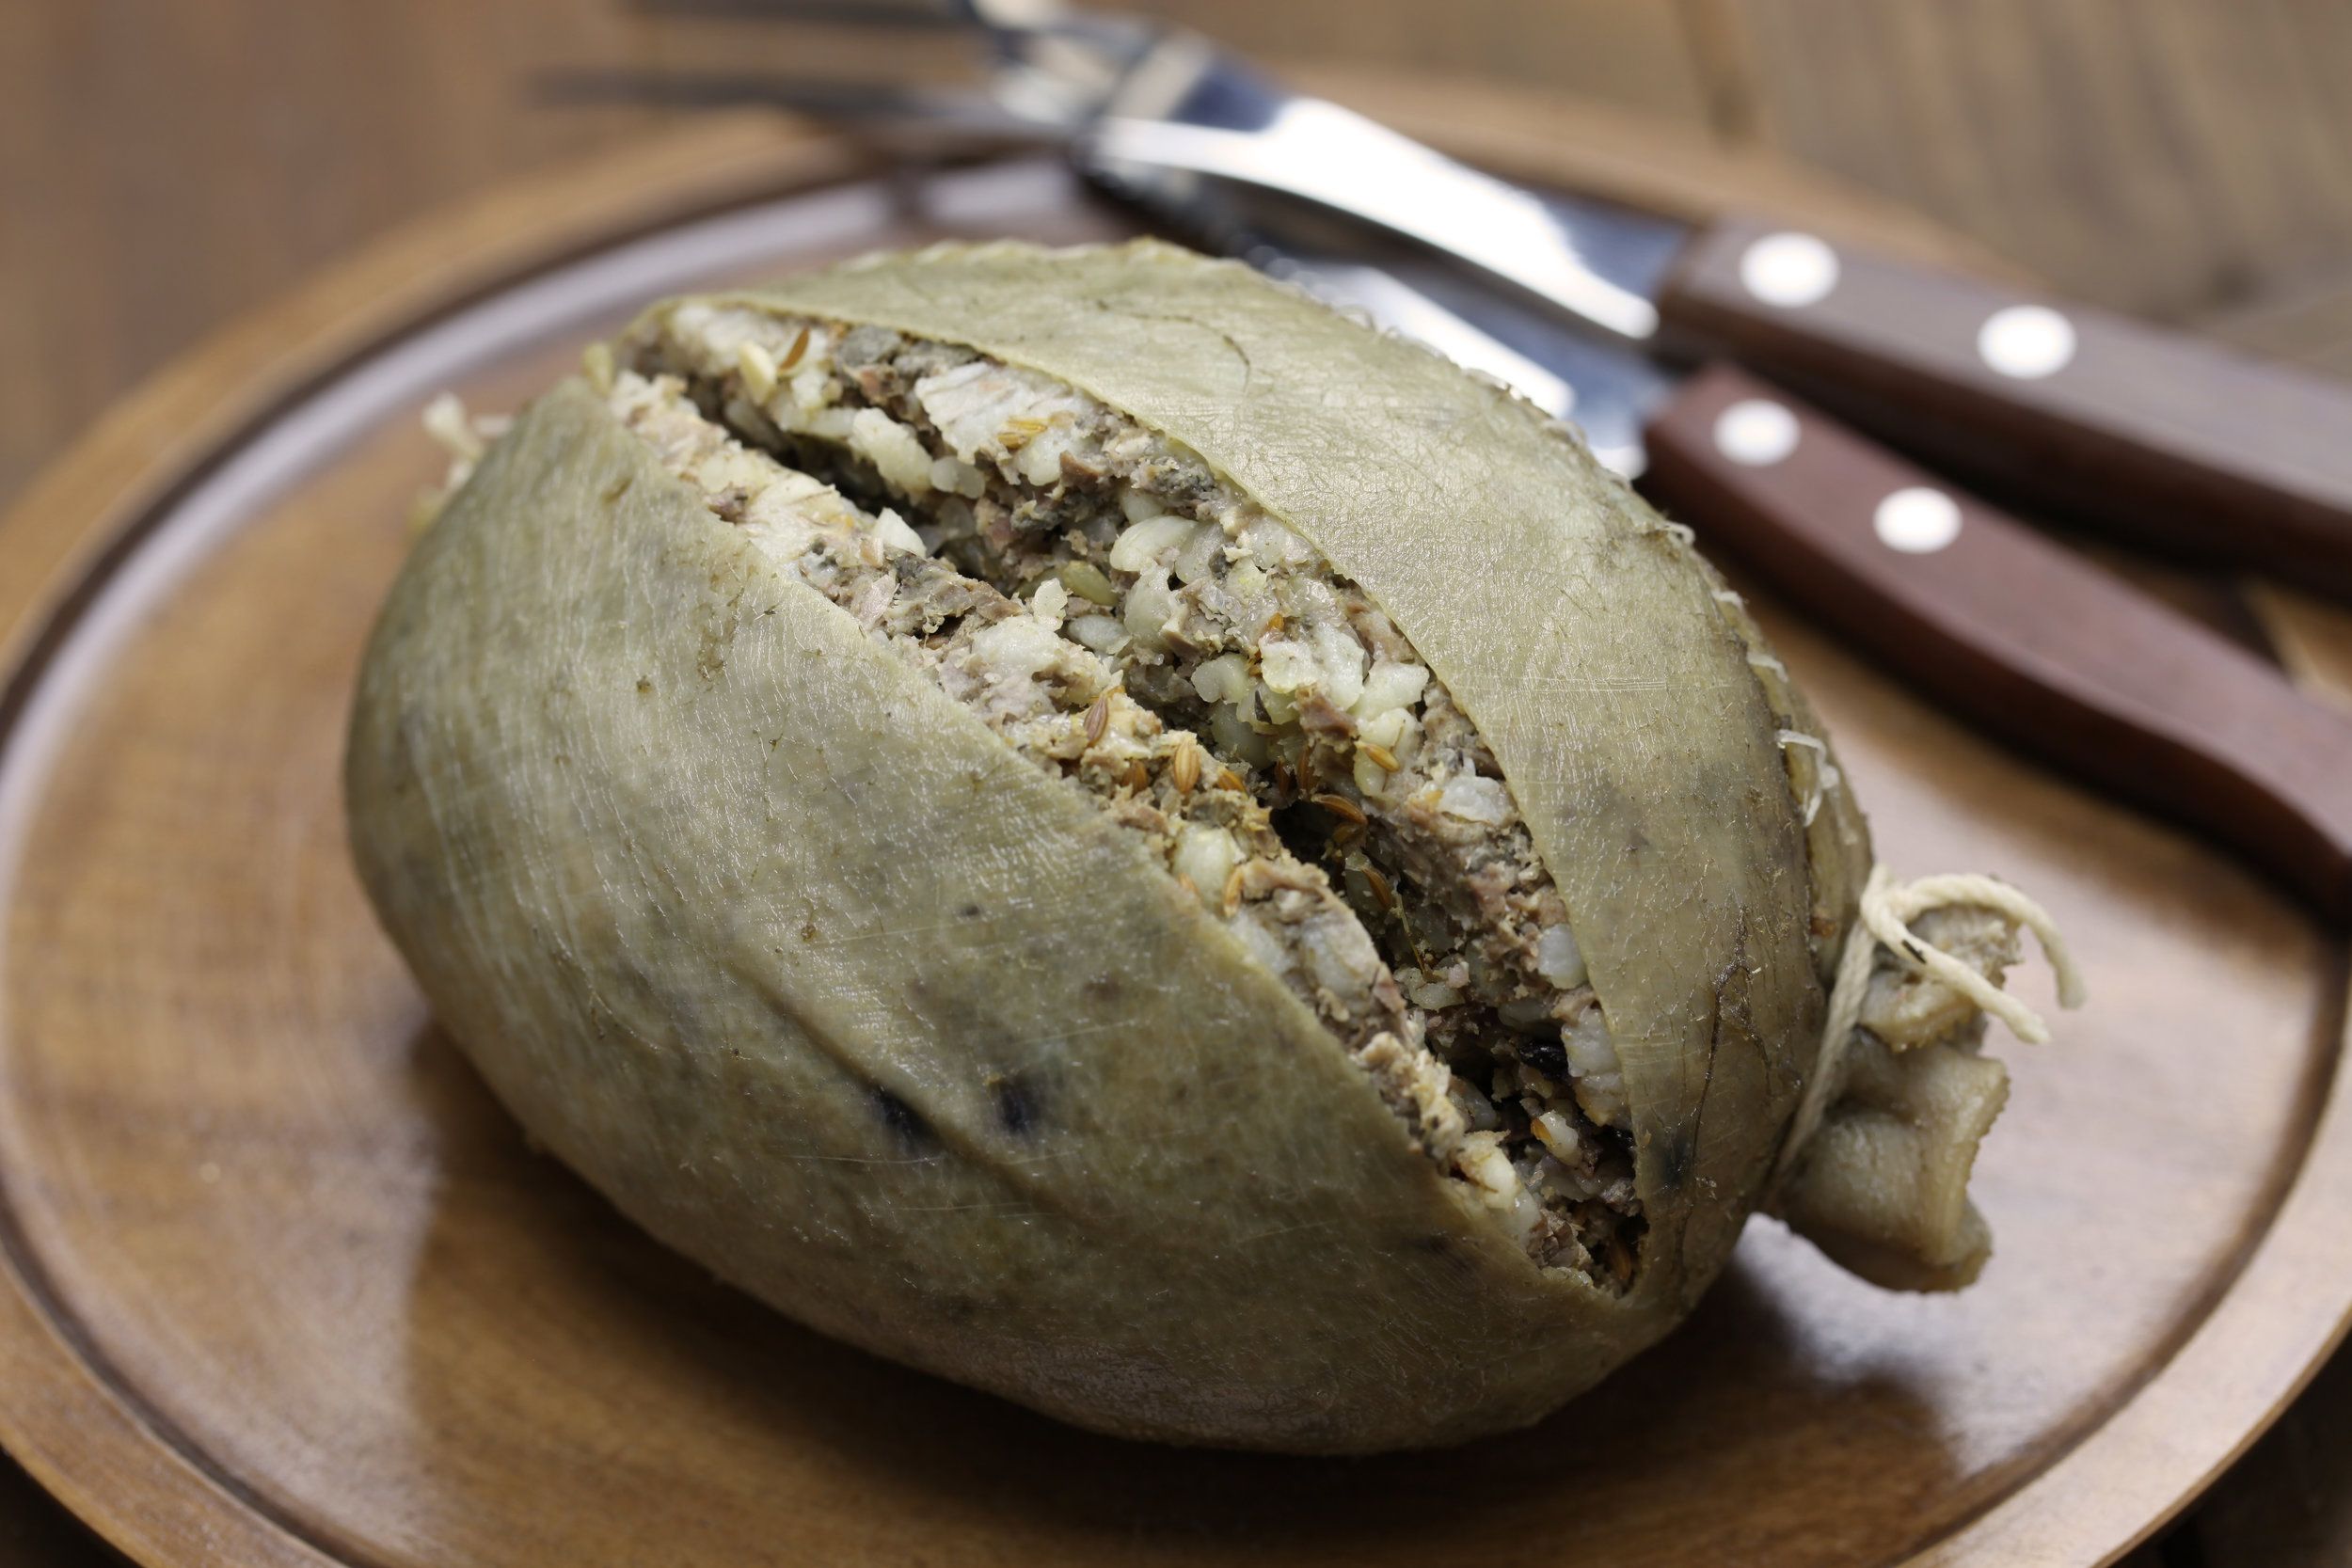 Homemade boiled haggis traditionally served in a sheep bladder